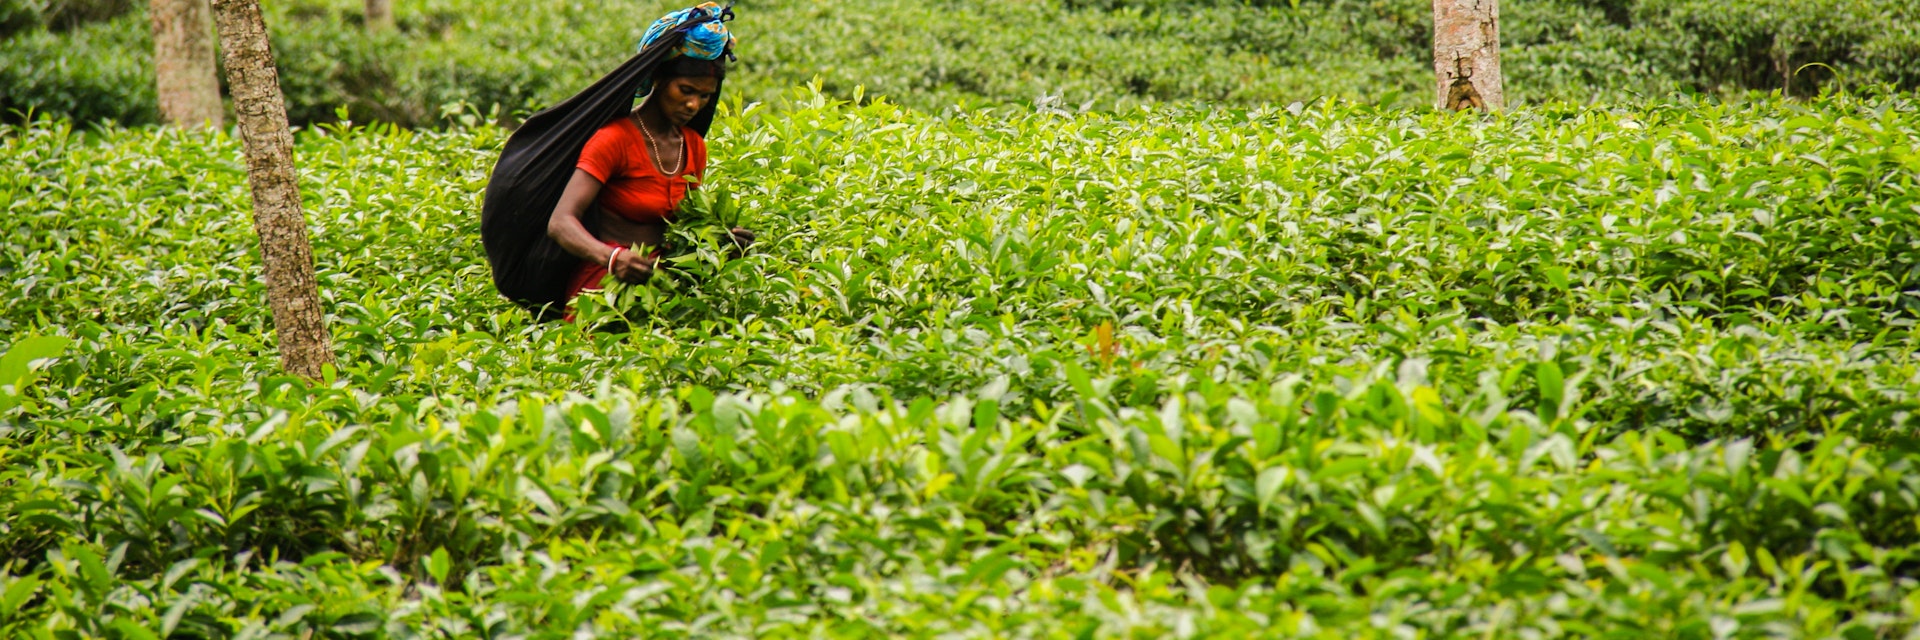 Srimangal, Bangladesh - May 24, 2013: A tea picker at work in a tea plantation in Srimangal, which is regarded as the tea capital of Bangladesh.